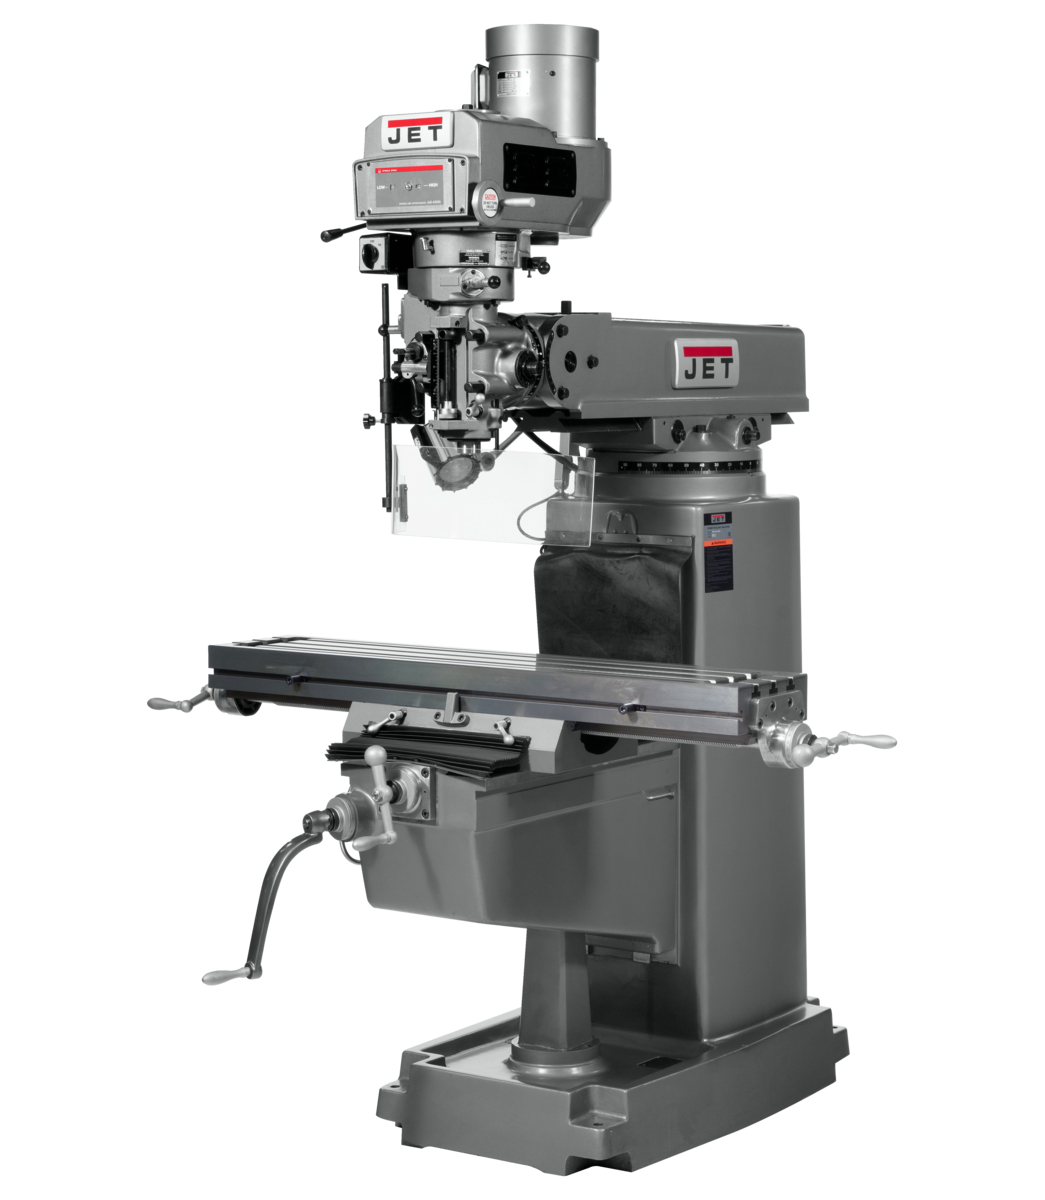 690256,The Jet JTM-1050 Mill With 3-Axis ACU-RITE 203 DRO (Knee) With X and Y-Axis Powerfeeds Only in Metalworking, Milling, Vertical Mills